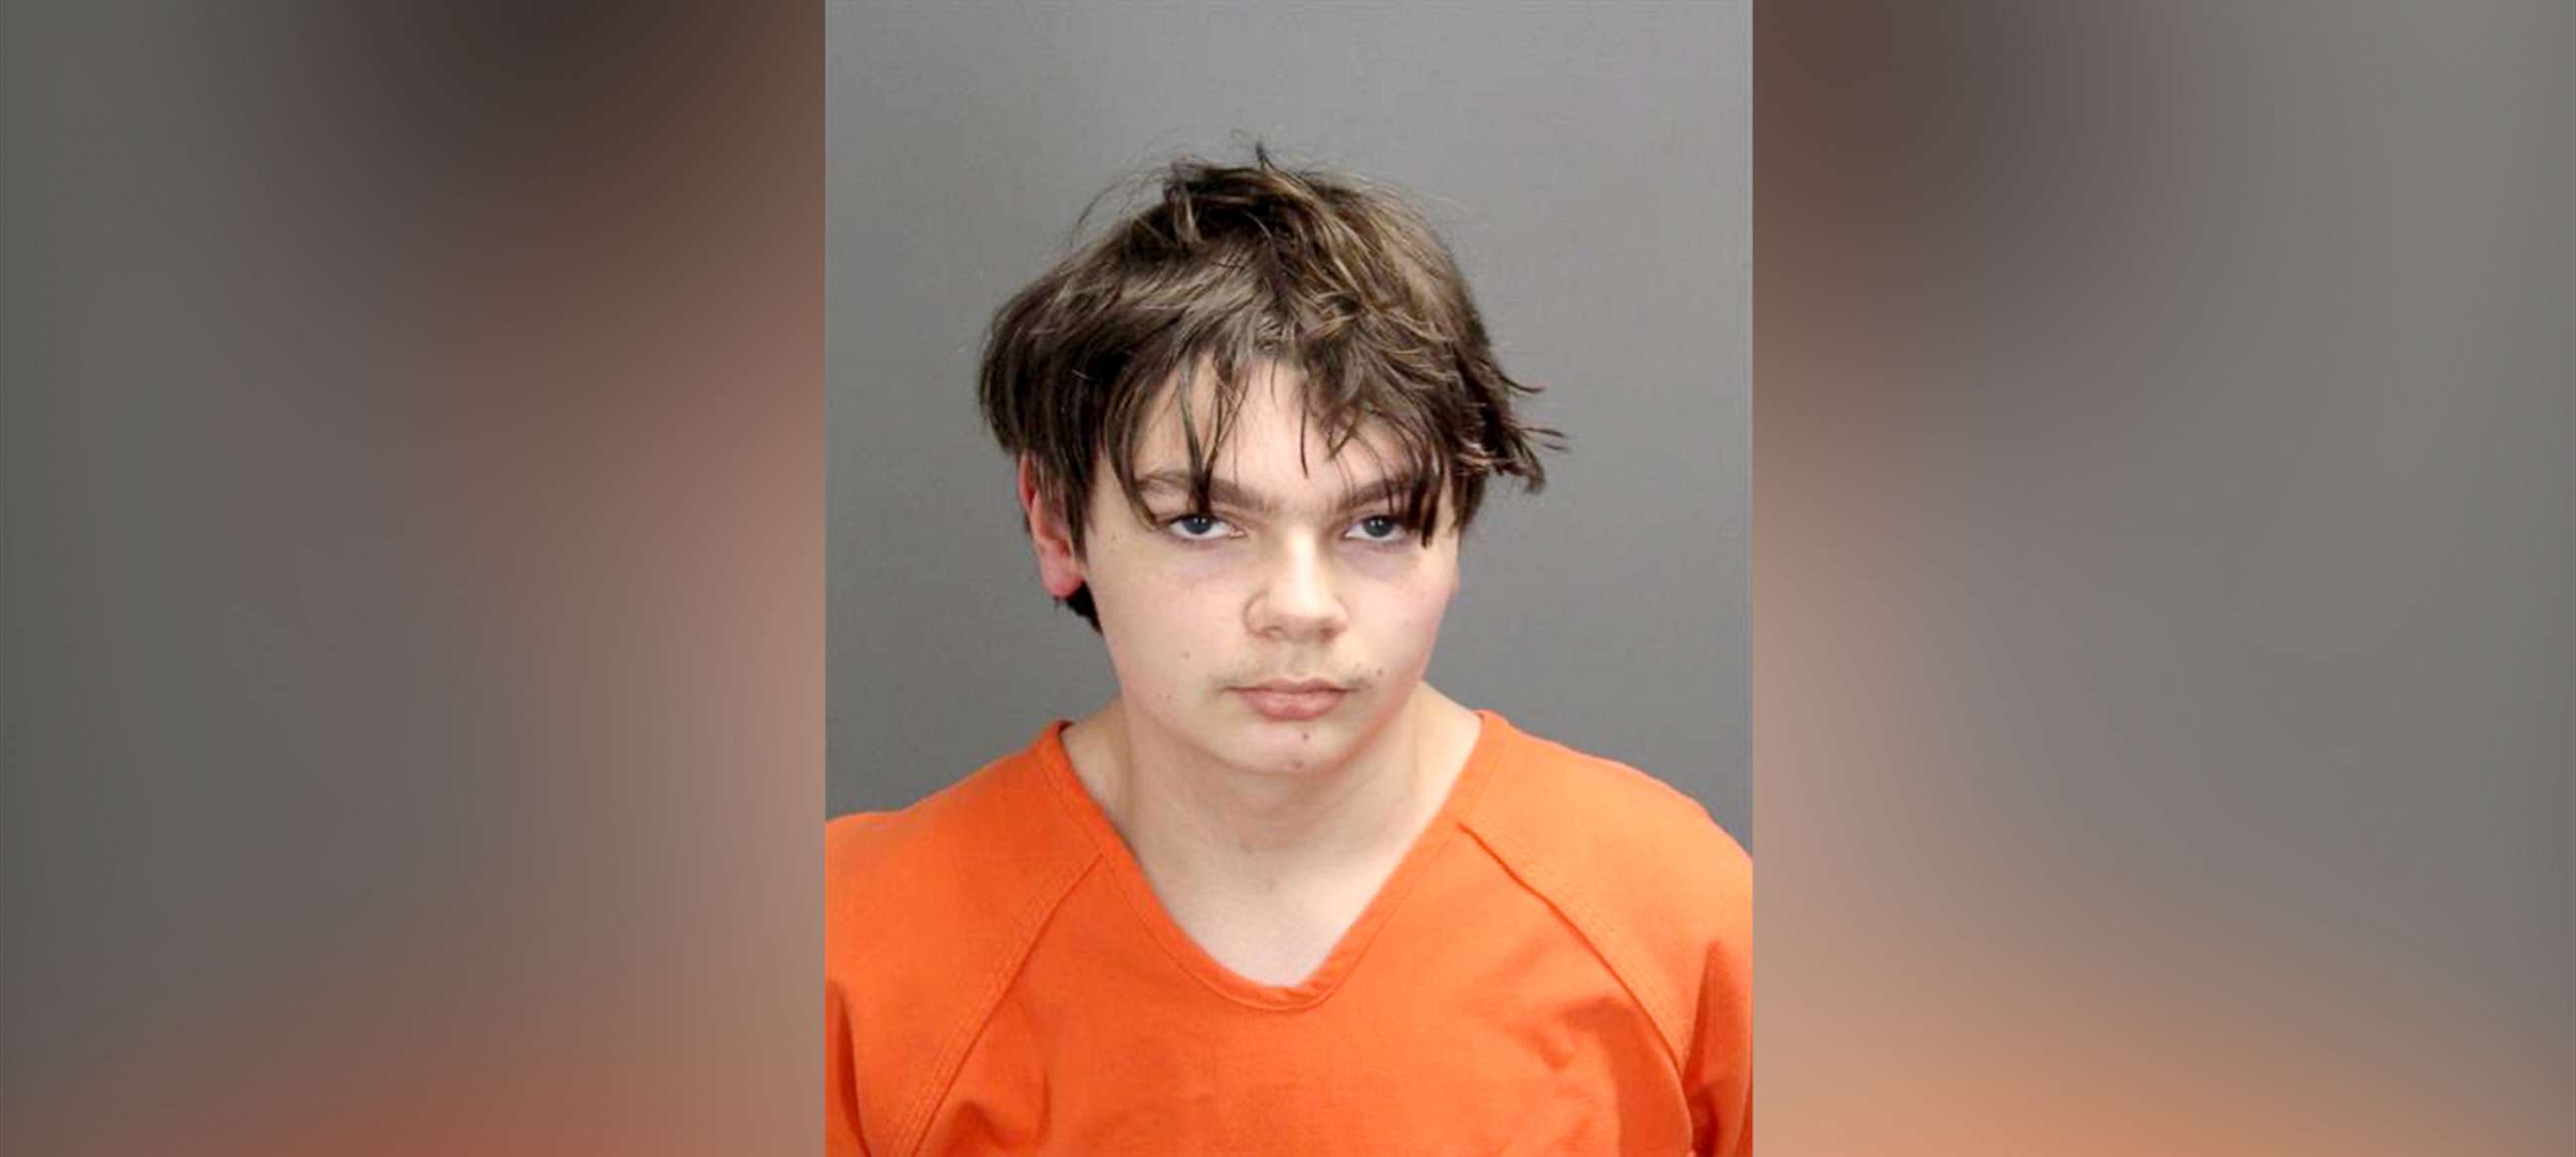 PHOTO: The Oakland County Sheriff's Office released the booking photo on Dec. 1, 2021, for Ethan Crumbley, 15.